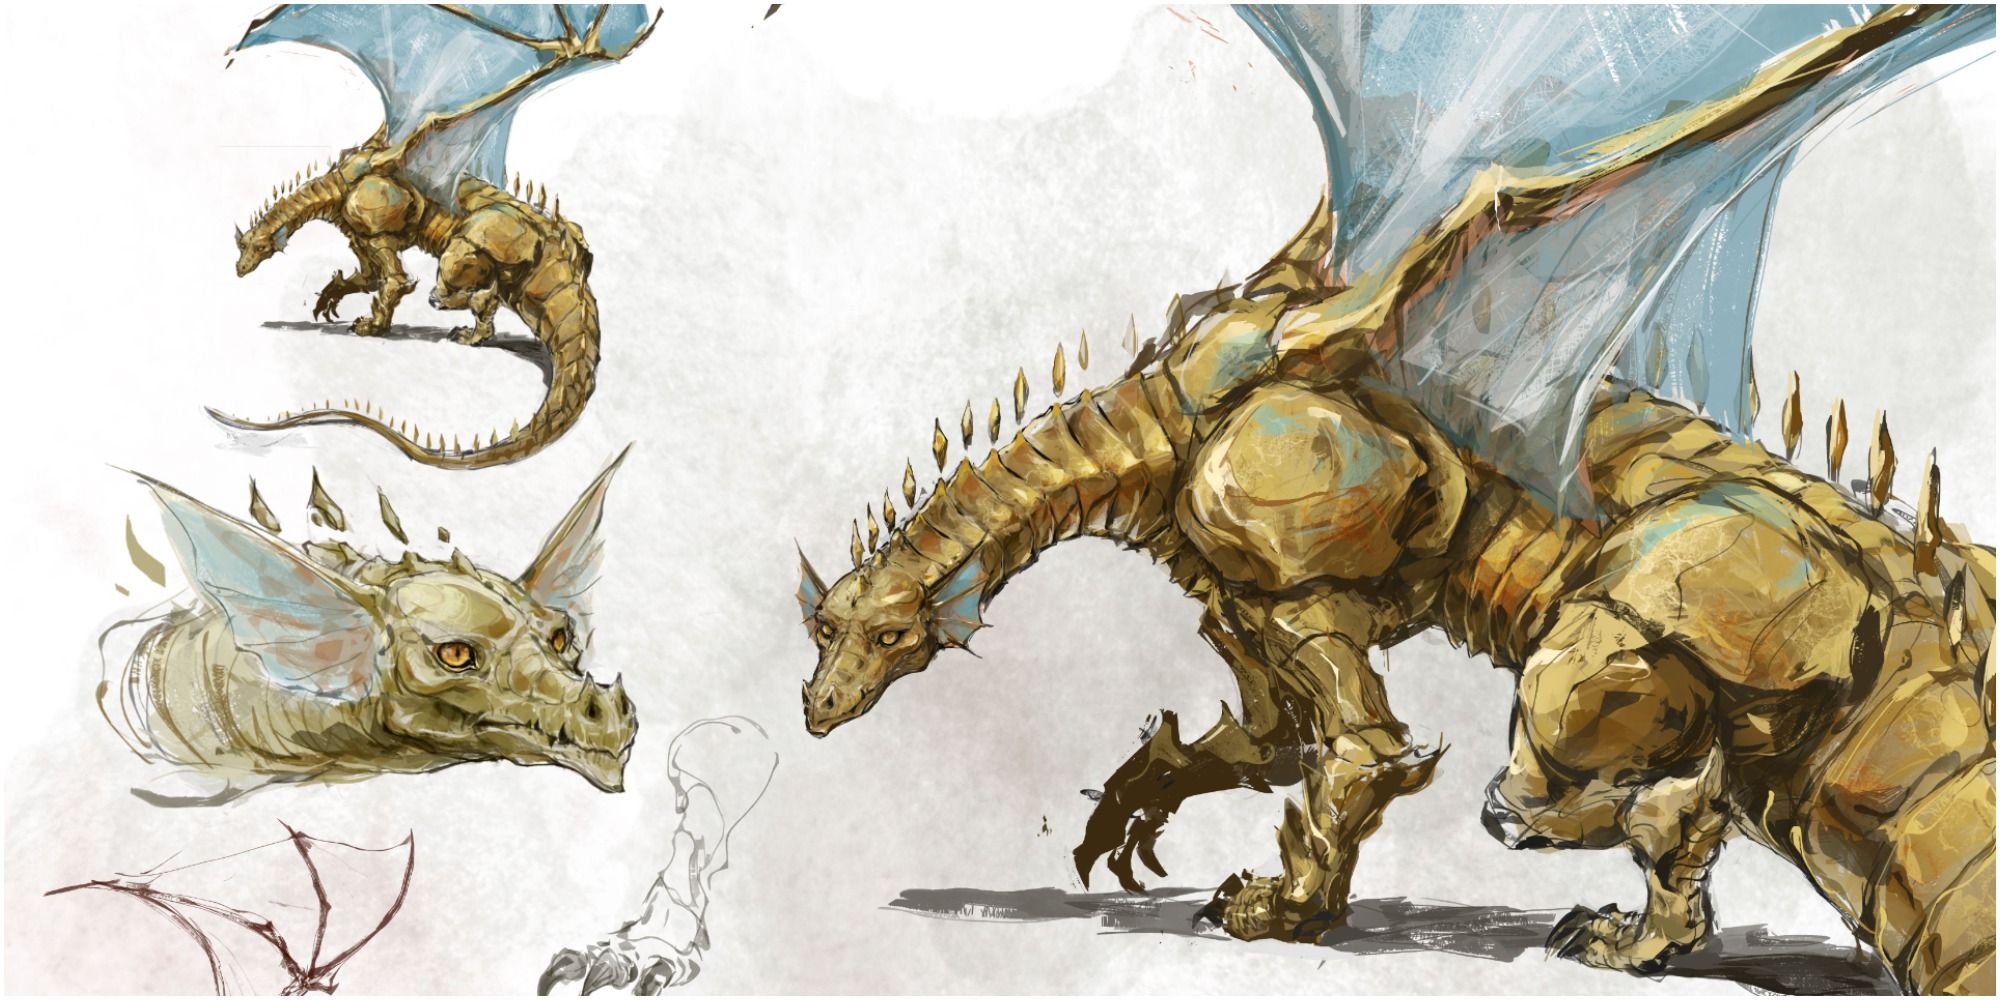 Tips For Running Gem Dragons In A DnD Campaign